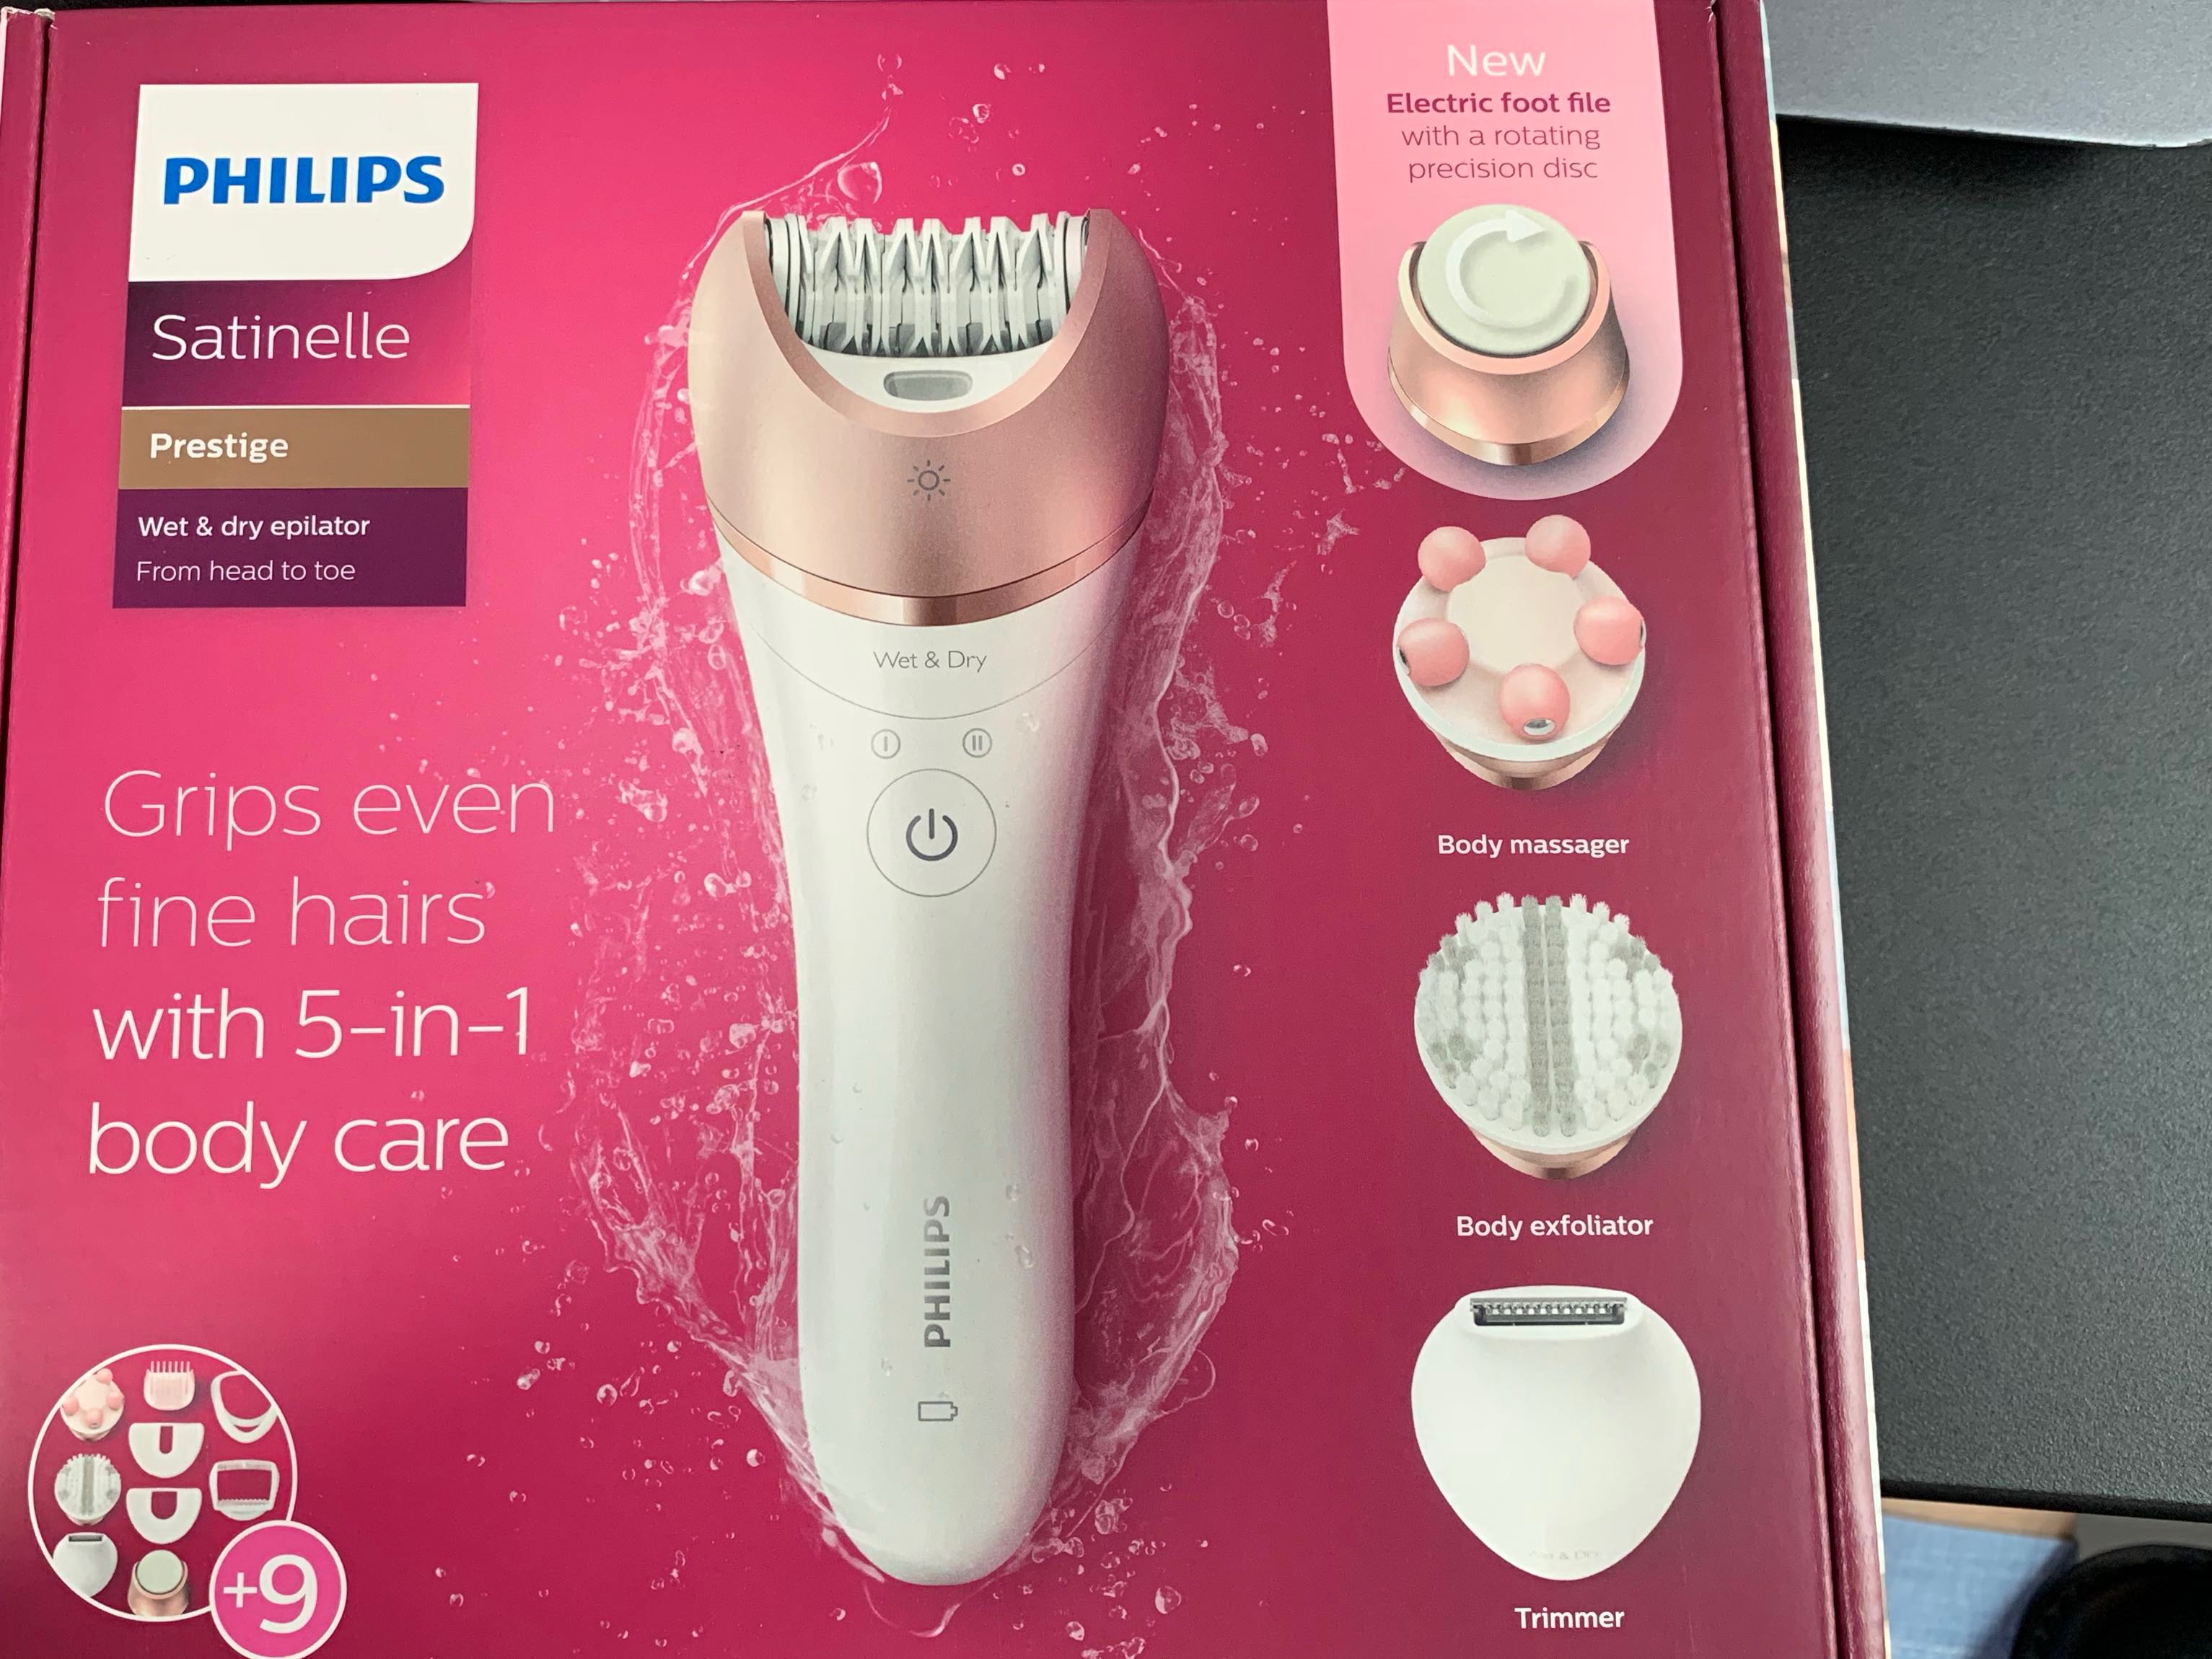 Corresponding Nautical Constricted Philips Satinelle Prestige Wet and Dry Epilator BRE652/00, Beauty &  Personal Care, Foot Care on Carousell